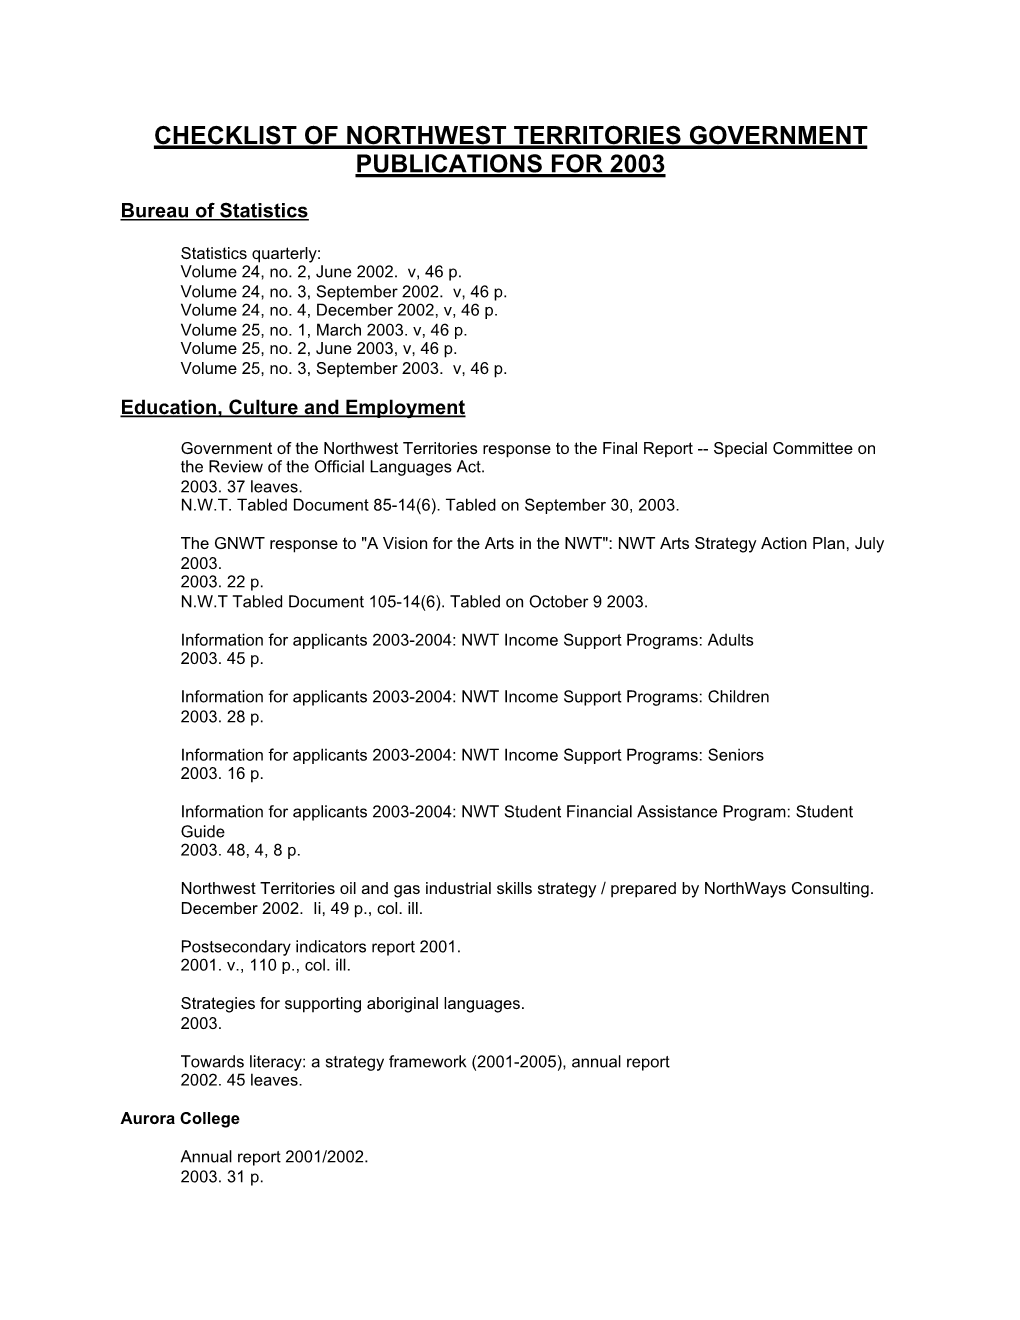 Checklist of Northwest Territories Government Publications for 2003